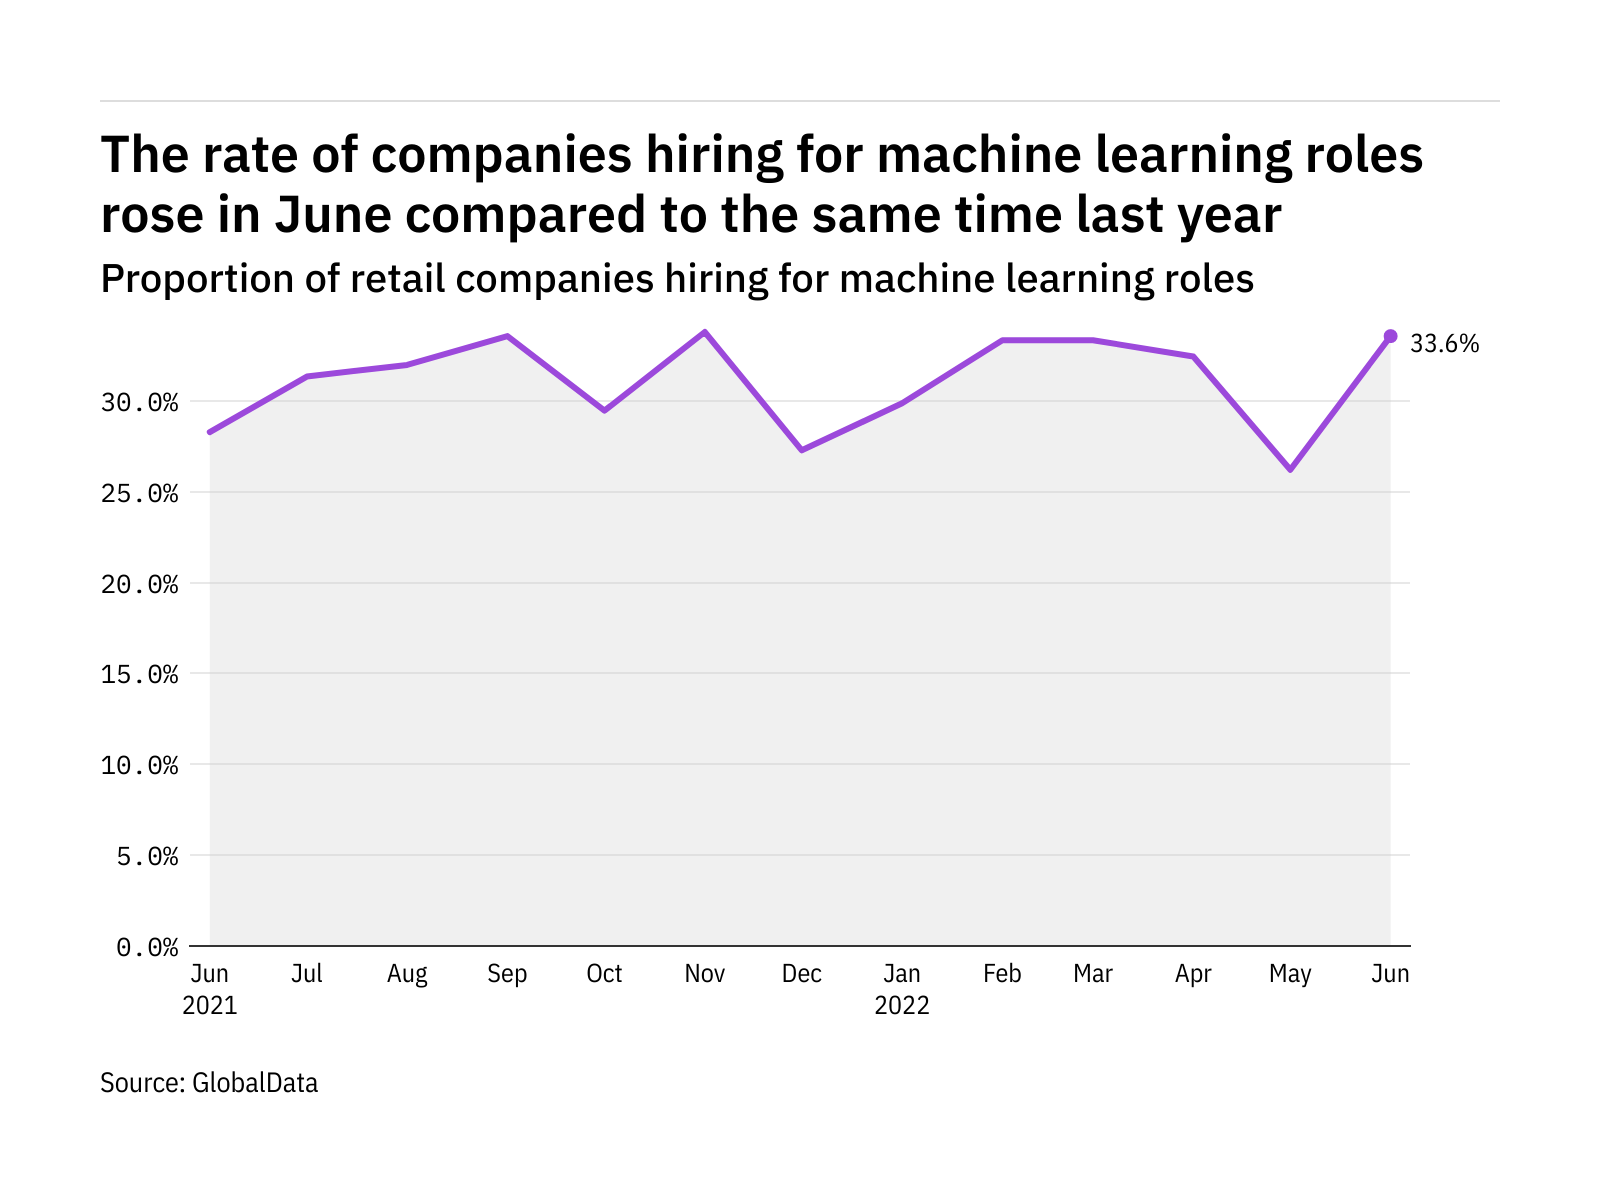 Machine learning hiring levels in the retail industry rose in June 2022